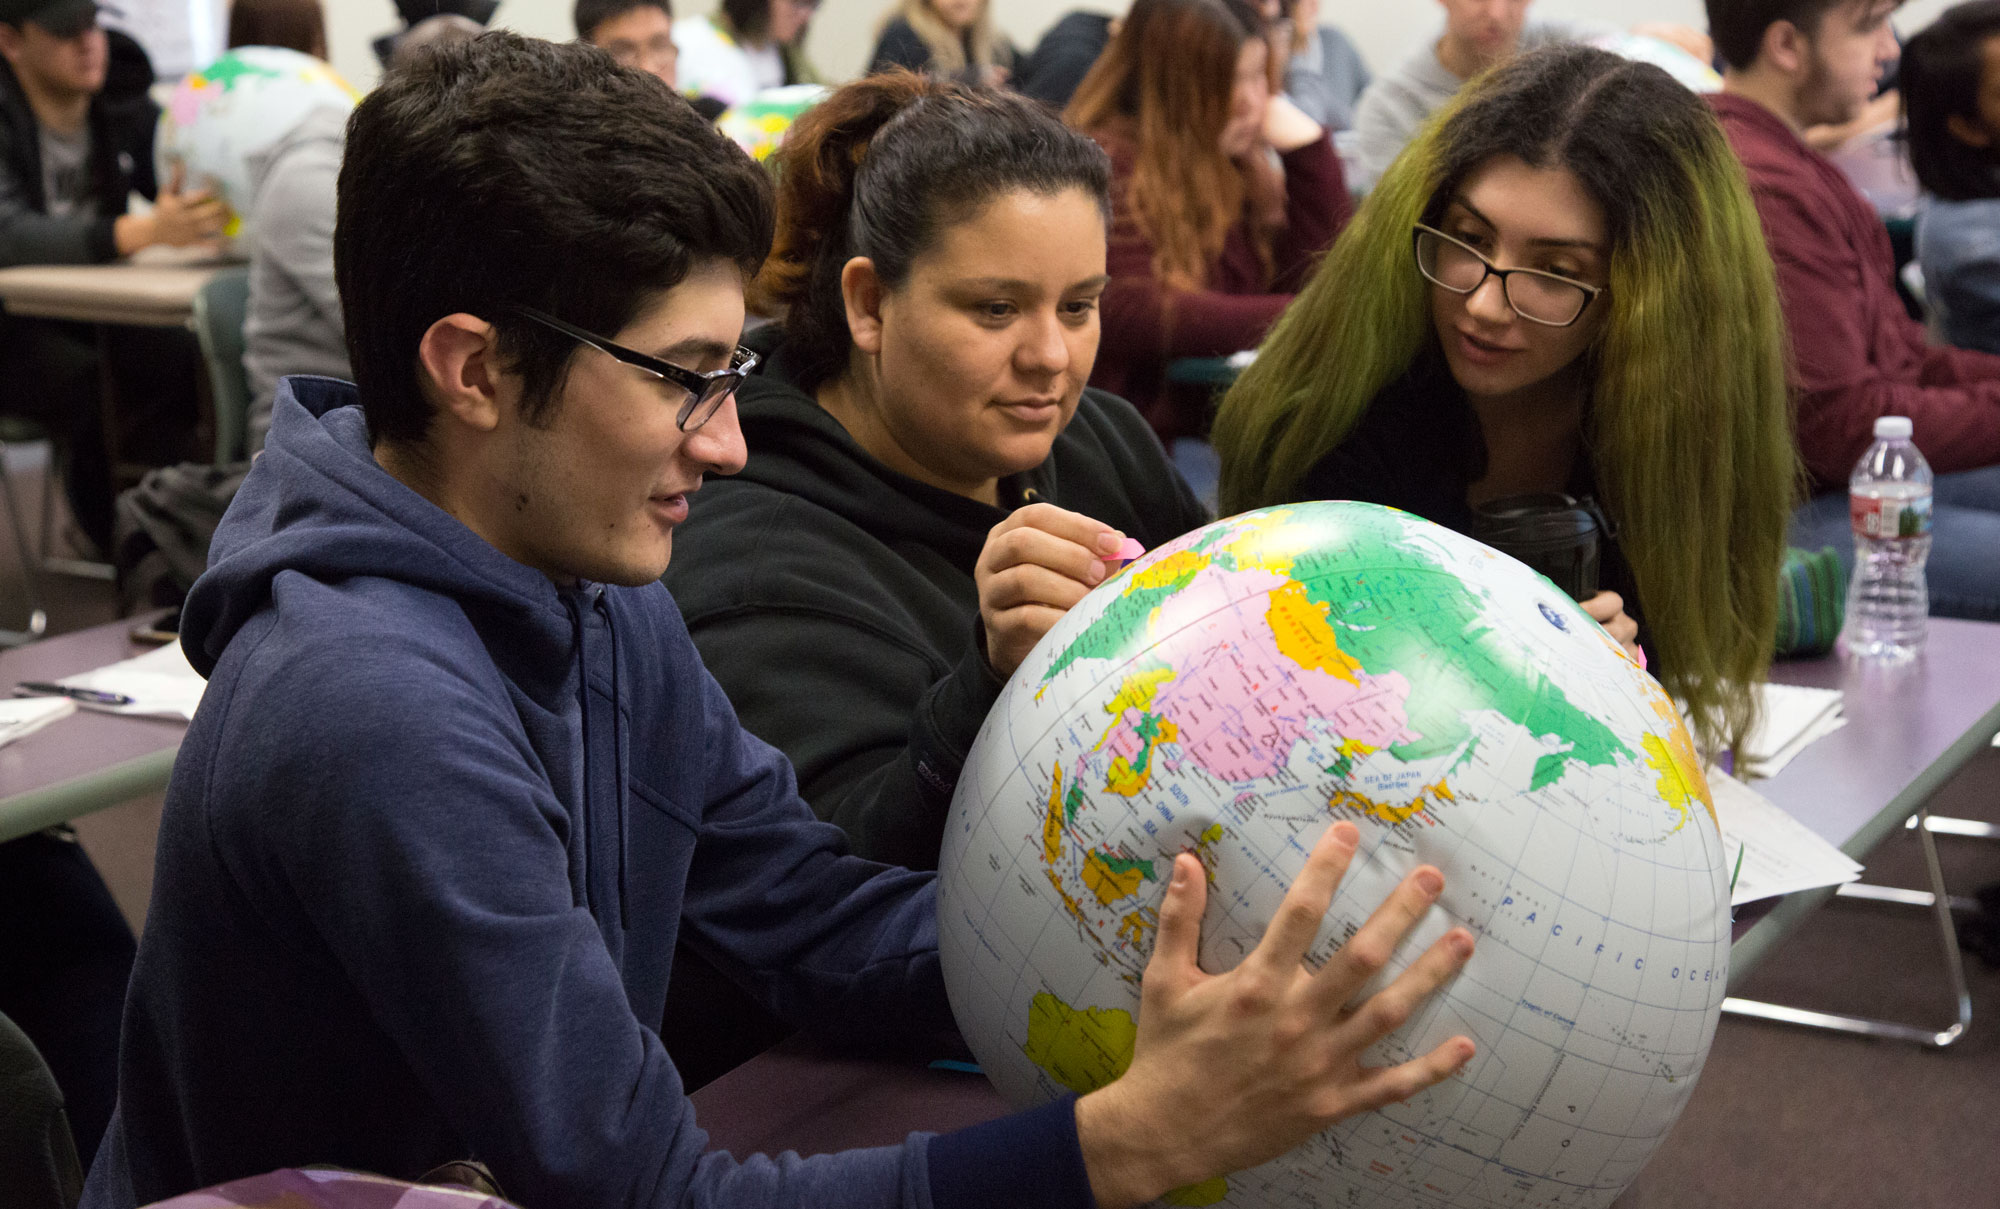 Students study a globe during class